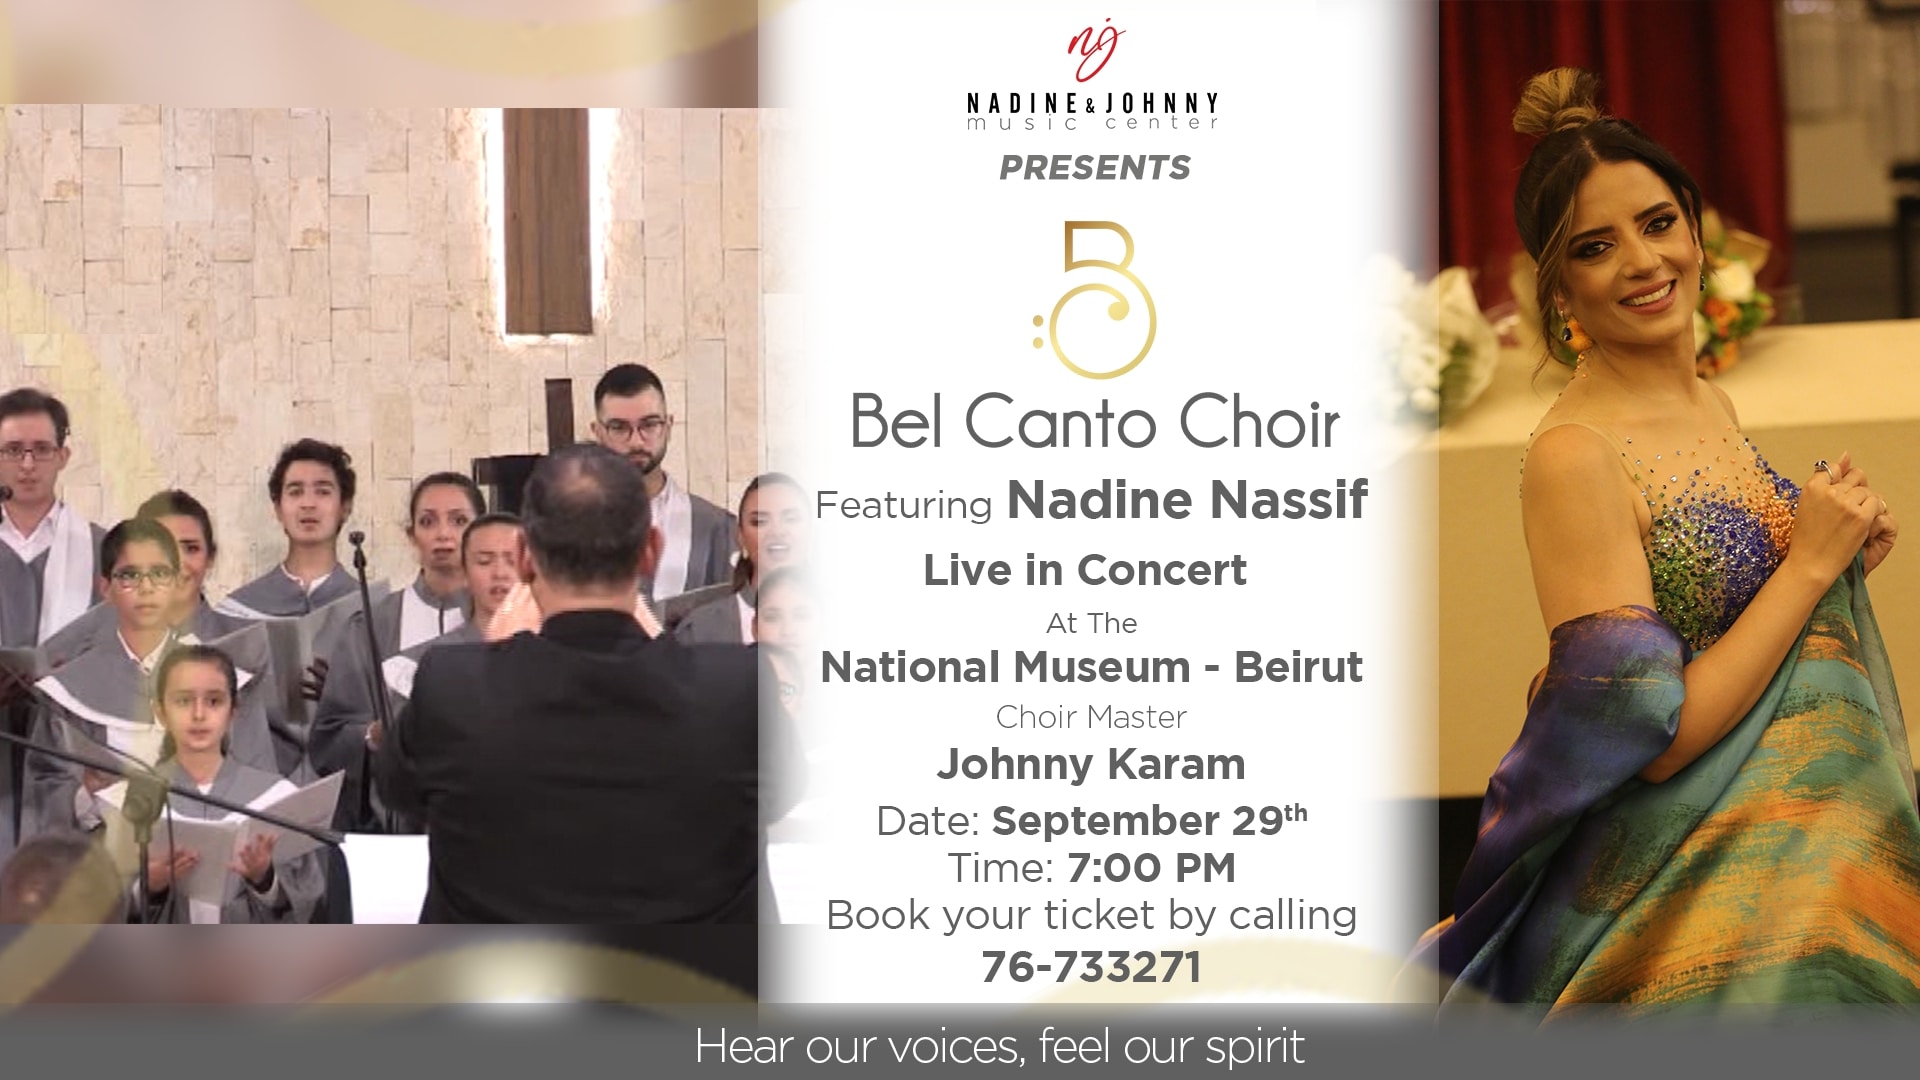 Bel Canto in Concert by the Soprano Nadine Nassif at The National Museum of Beirut